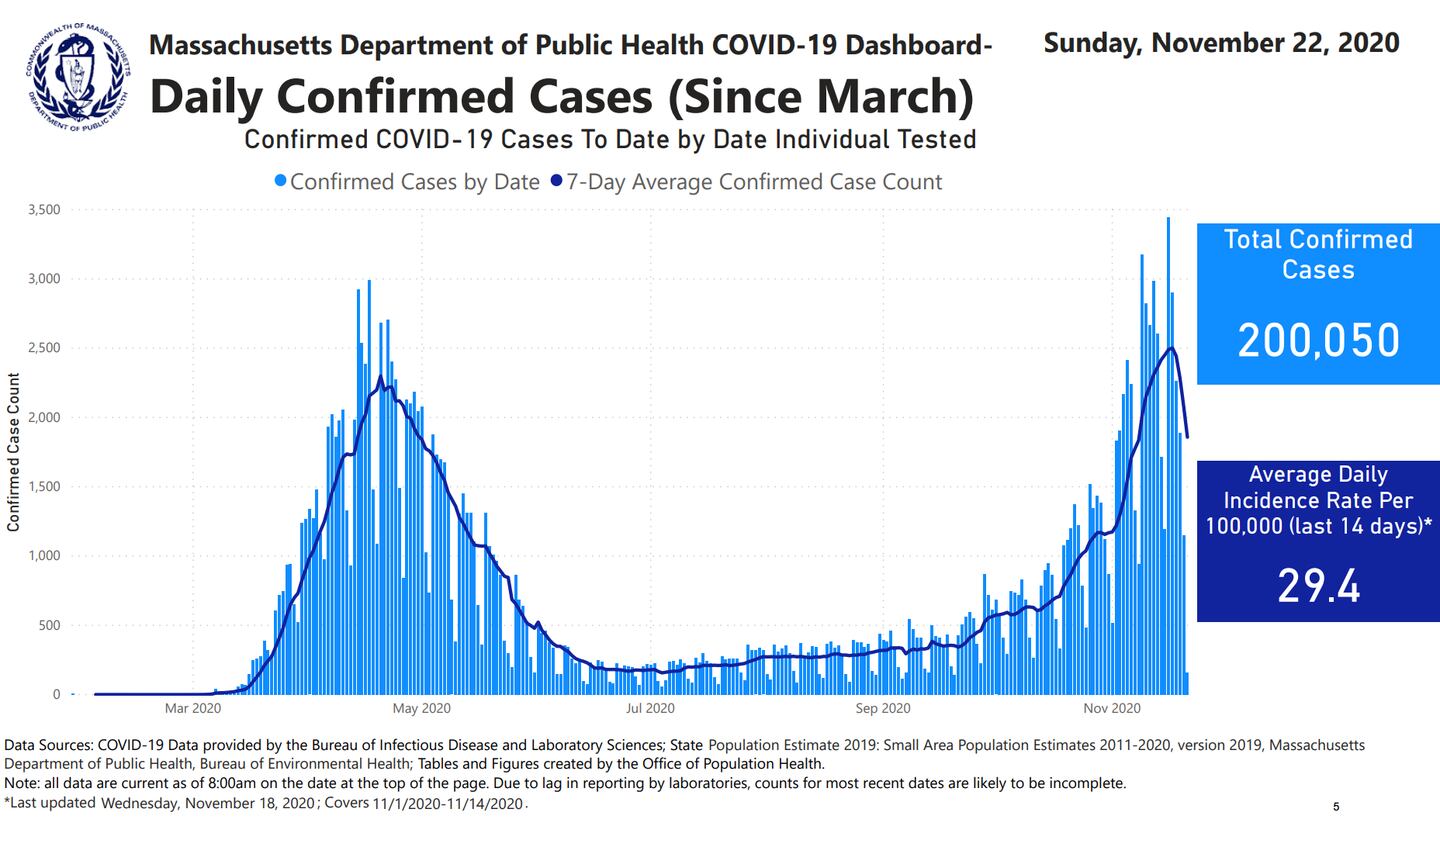 Massachusetts recorded over 200,000 confirmed COVID-19 cases since the start of the pandemic on Sunday